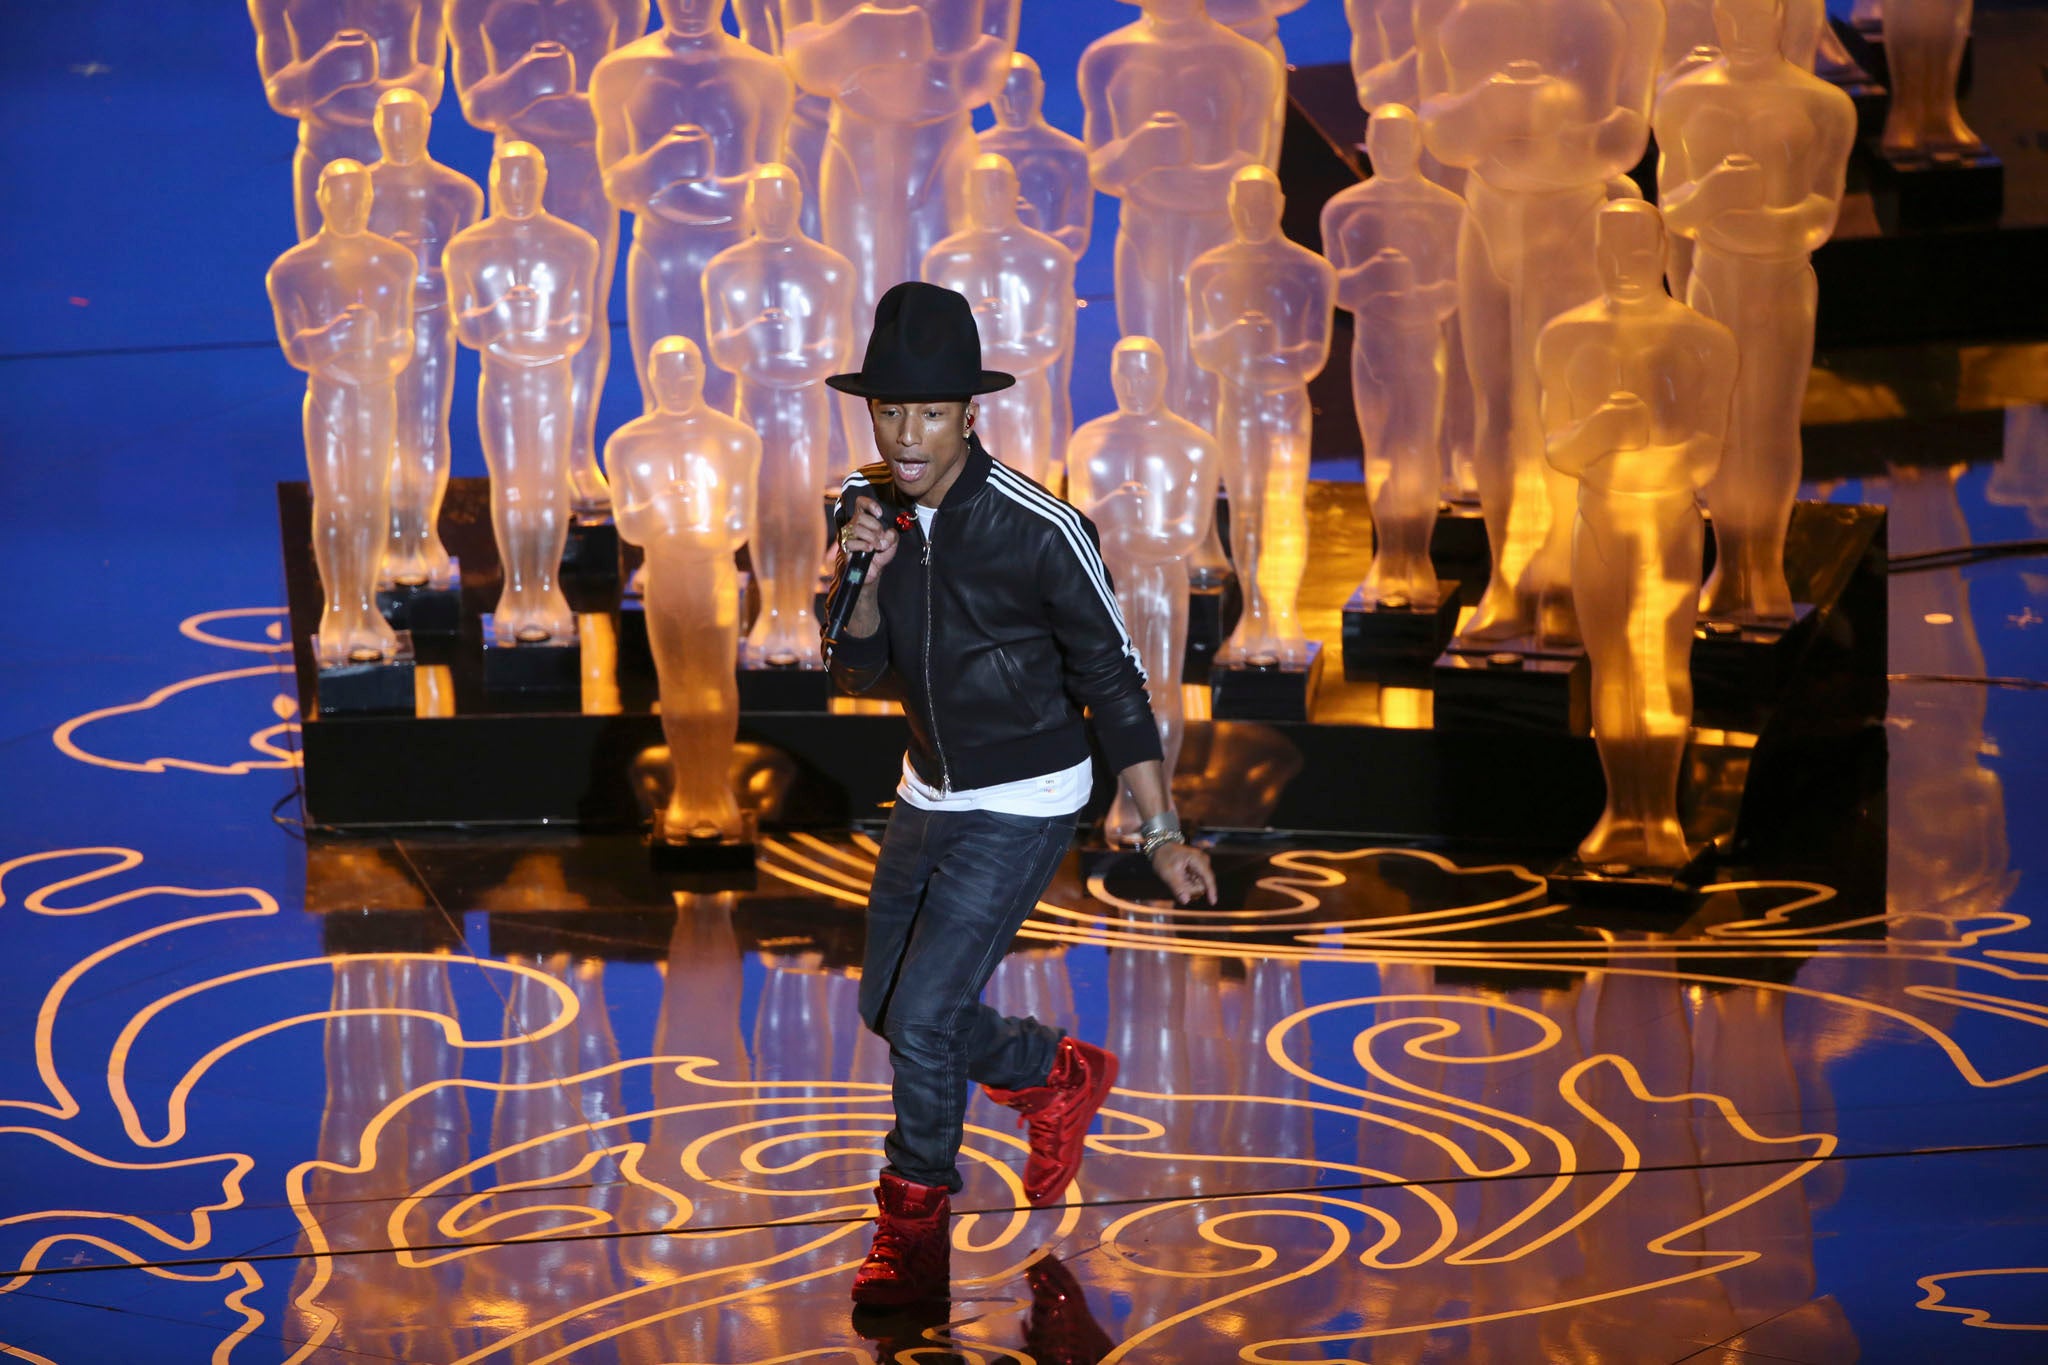 Pharrell performed the record-breaking track at Sunday night's Oscars